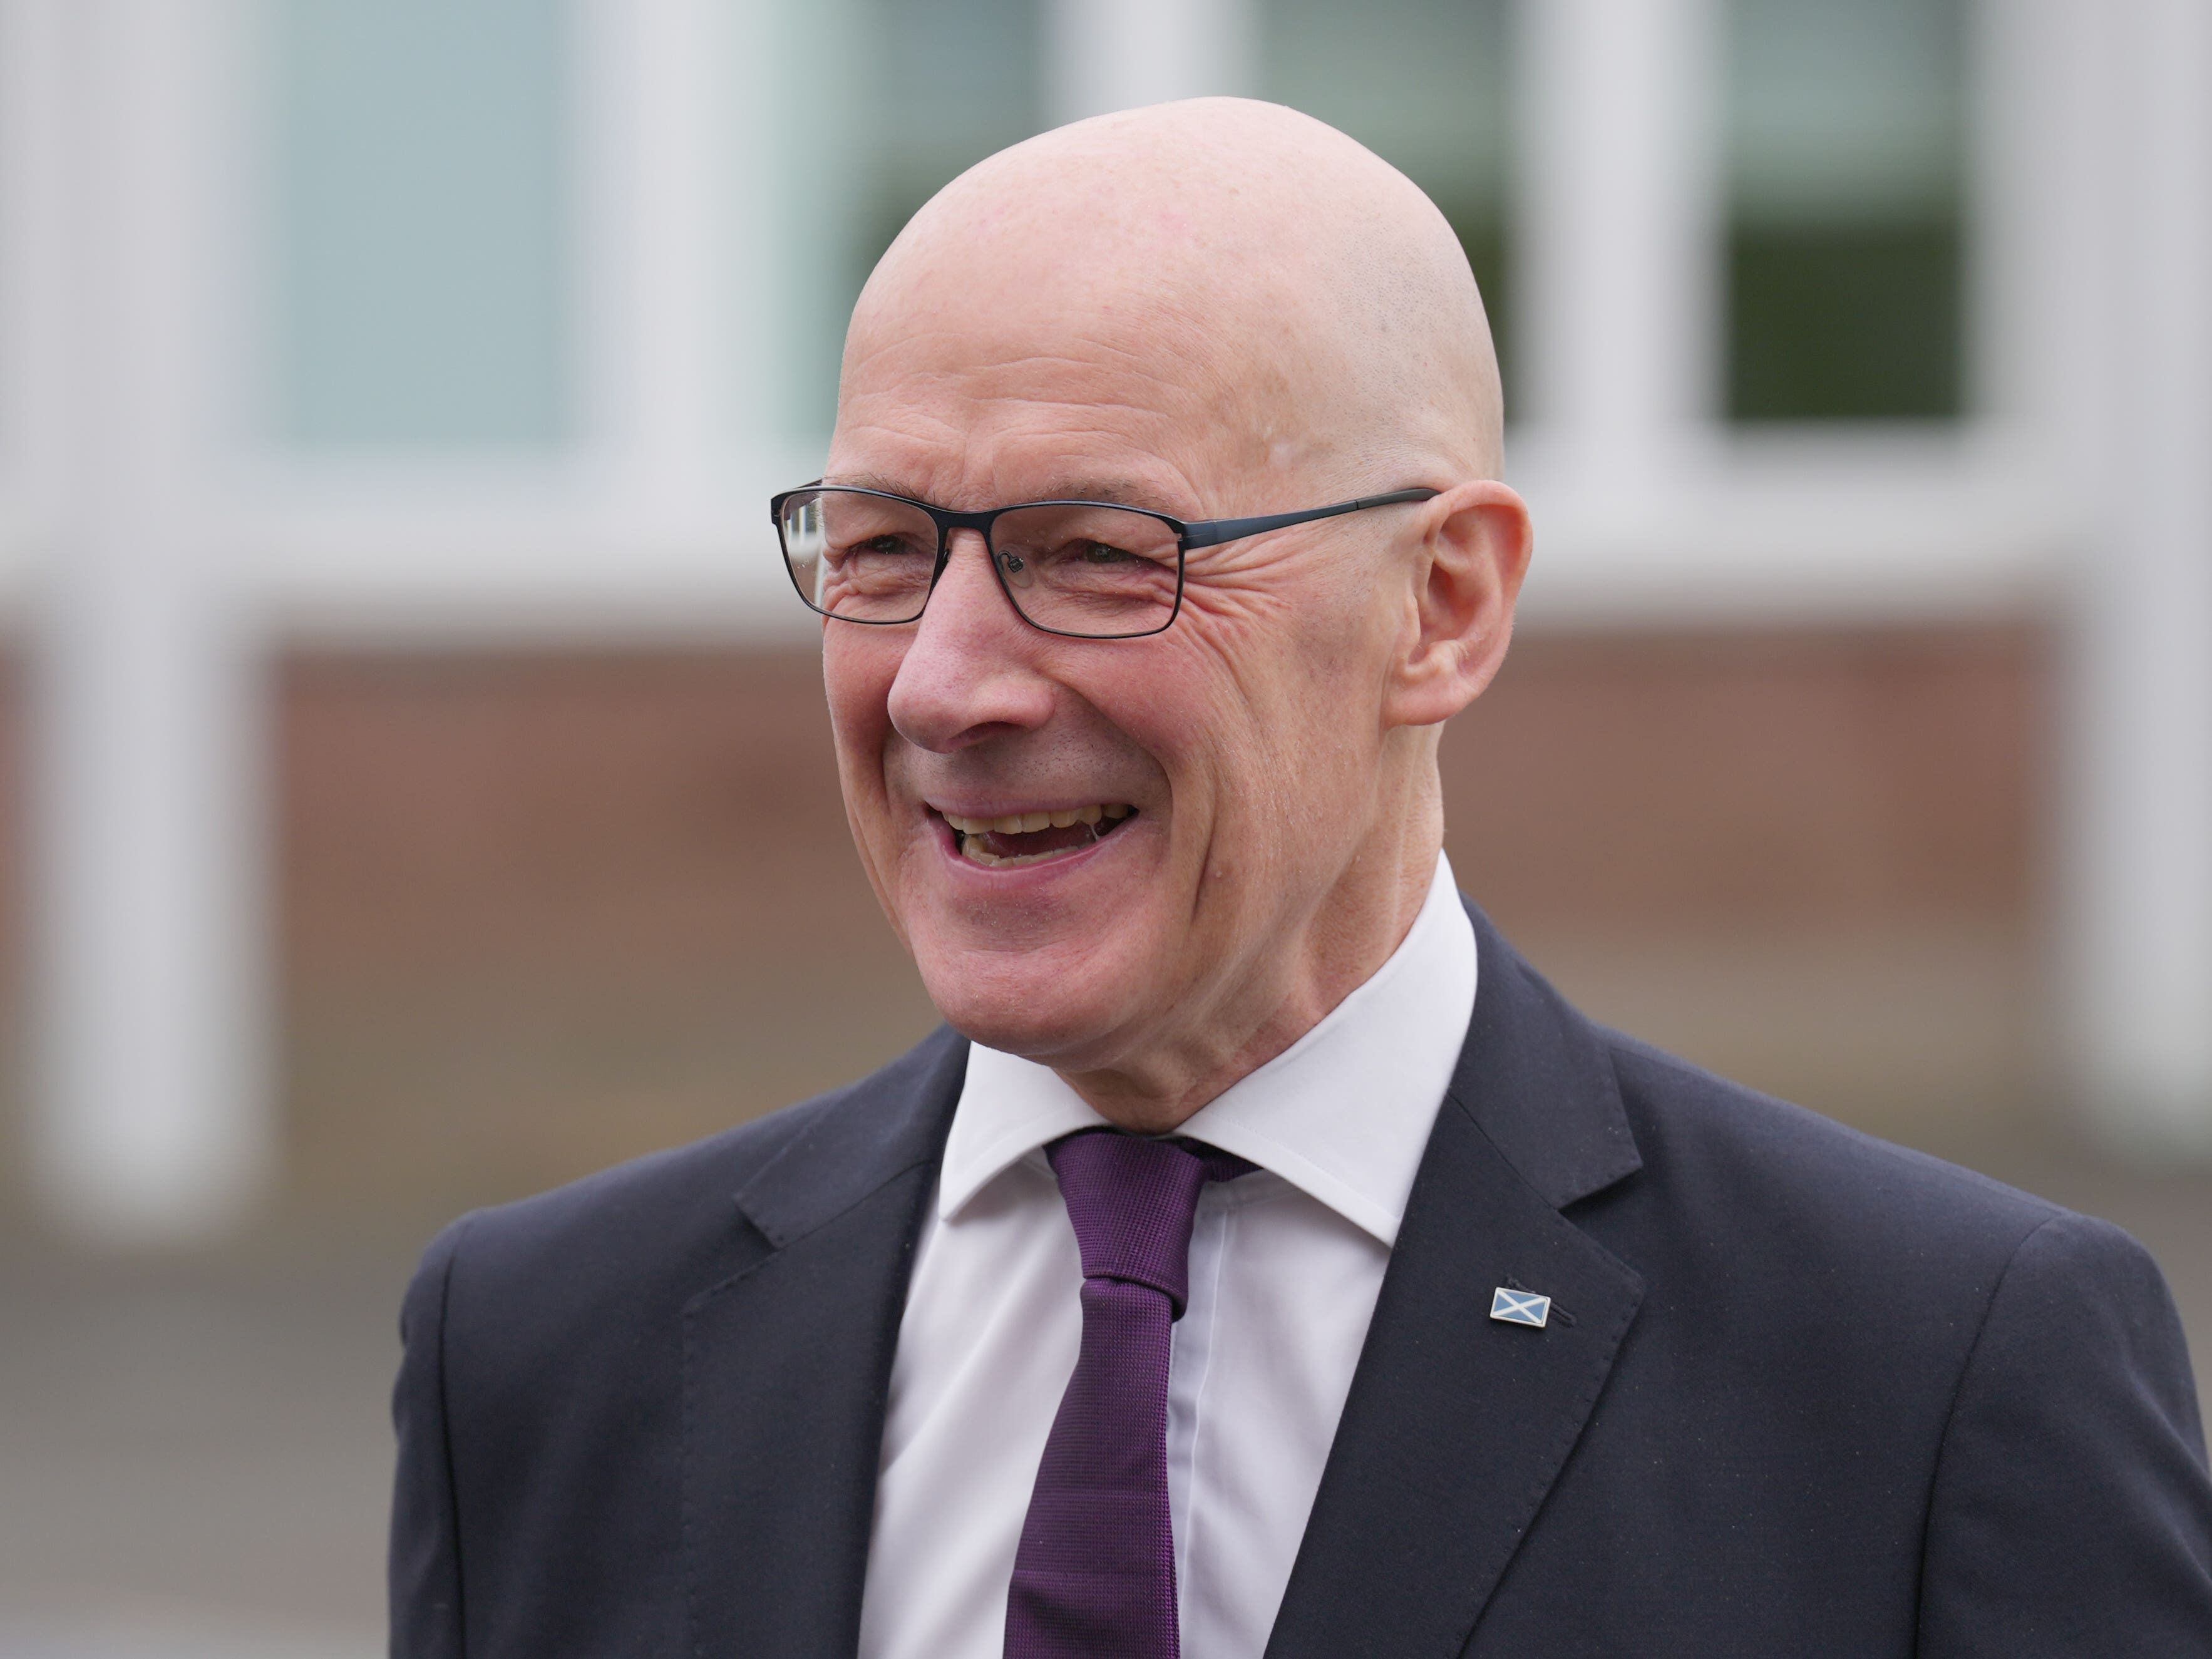 Swinney: I have reunited the SNP and will take positive message to Scots